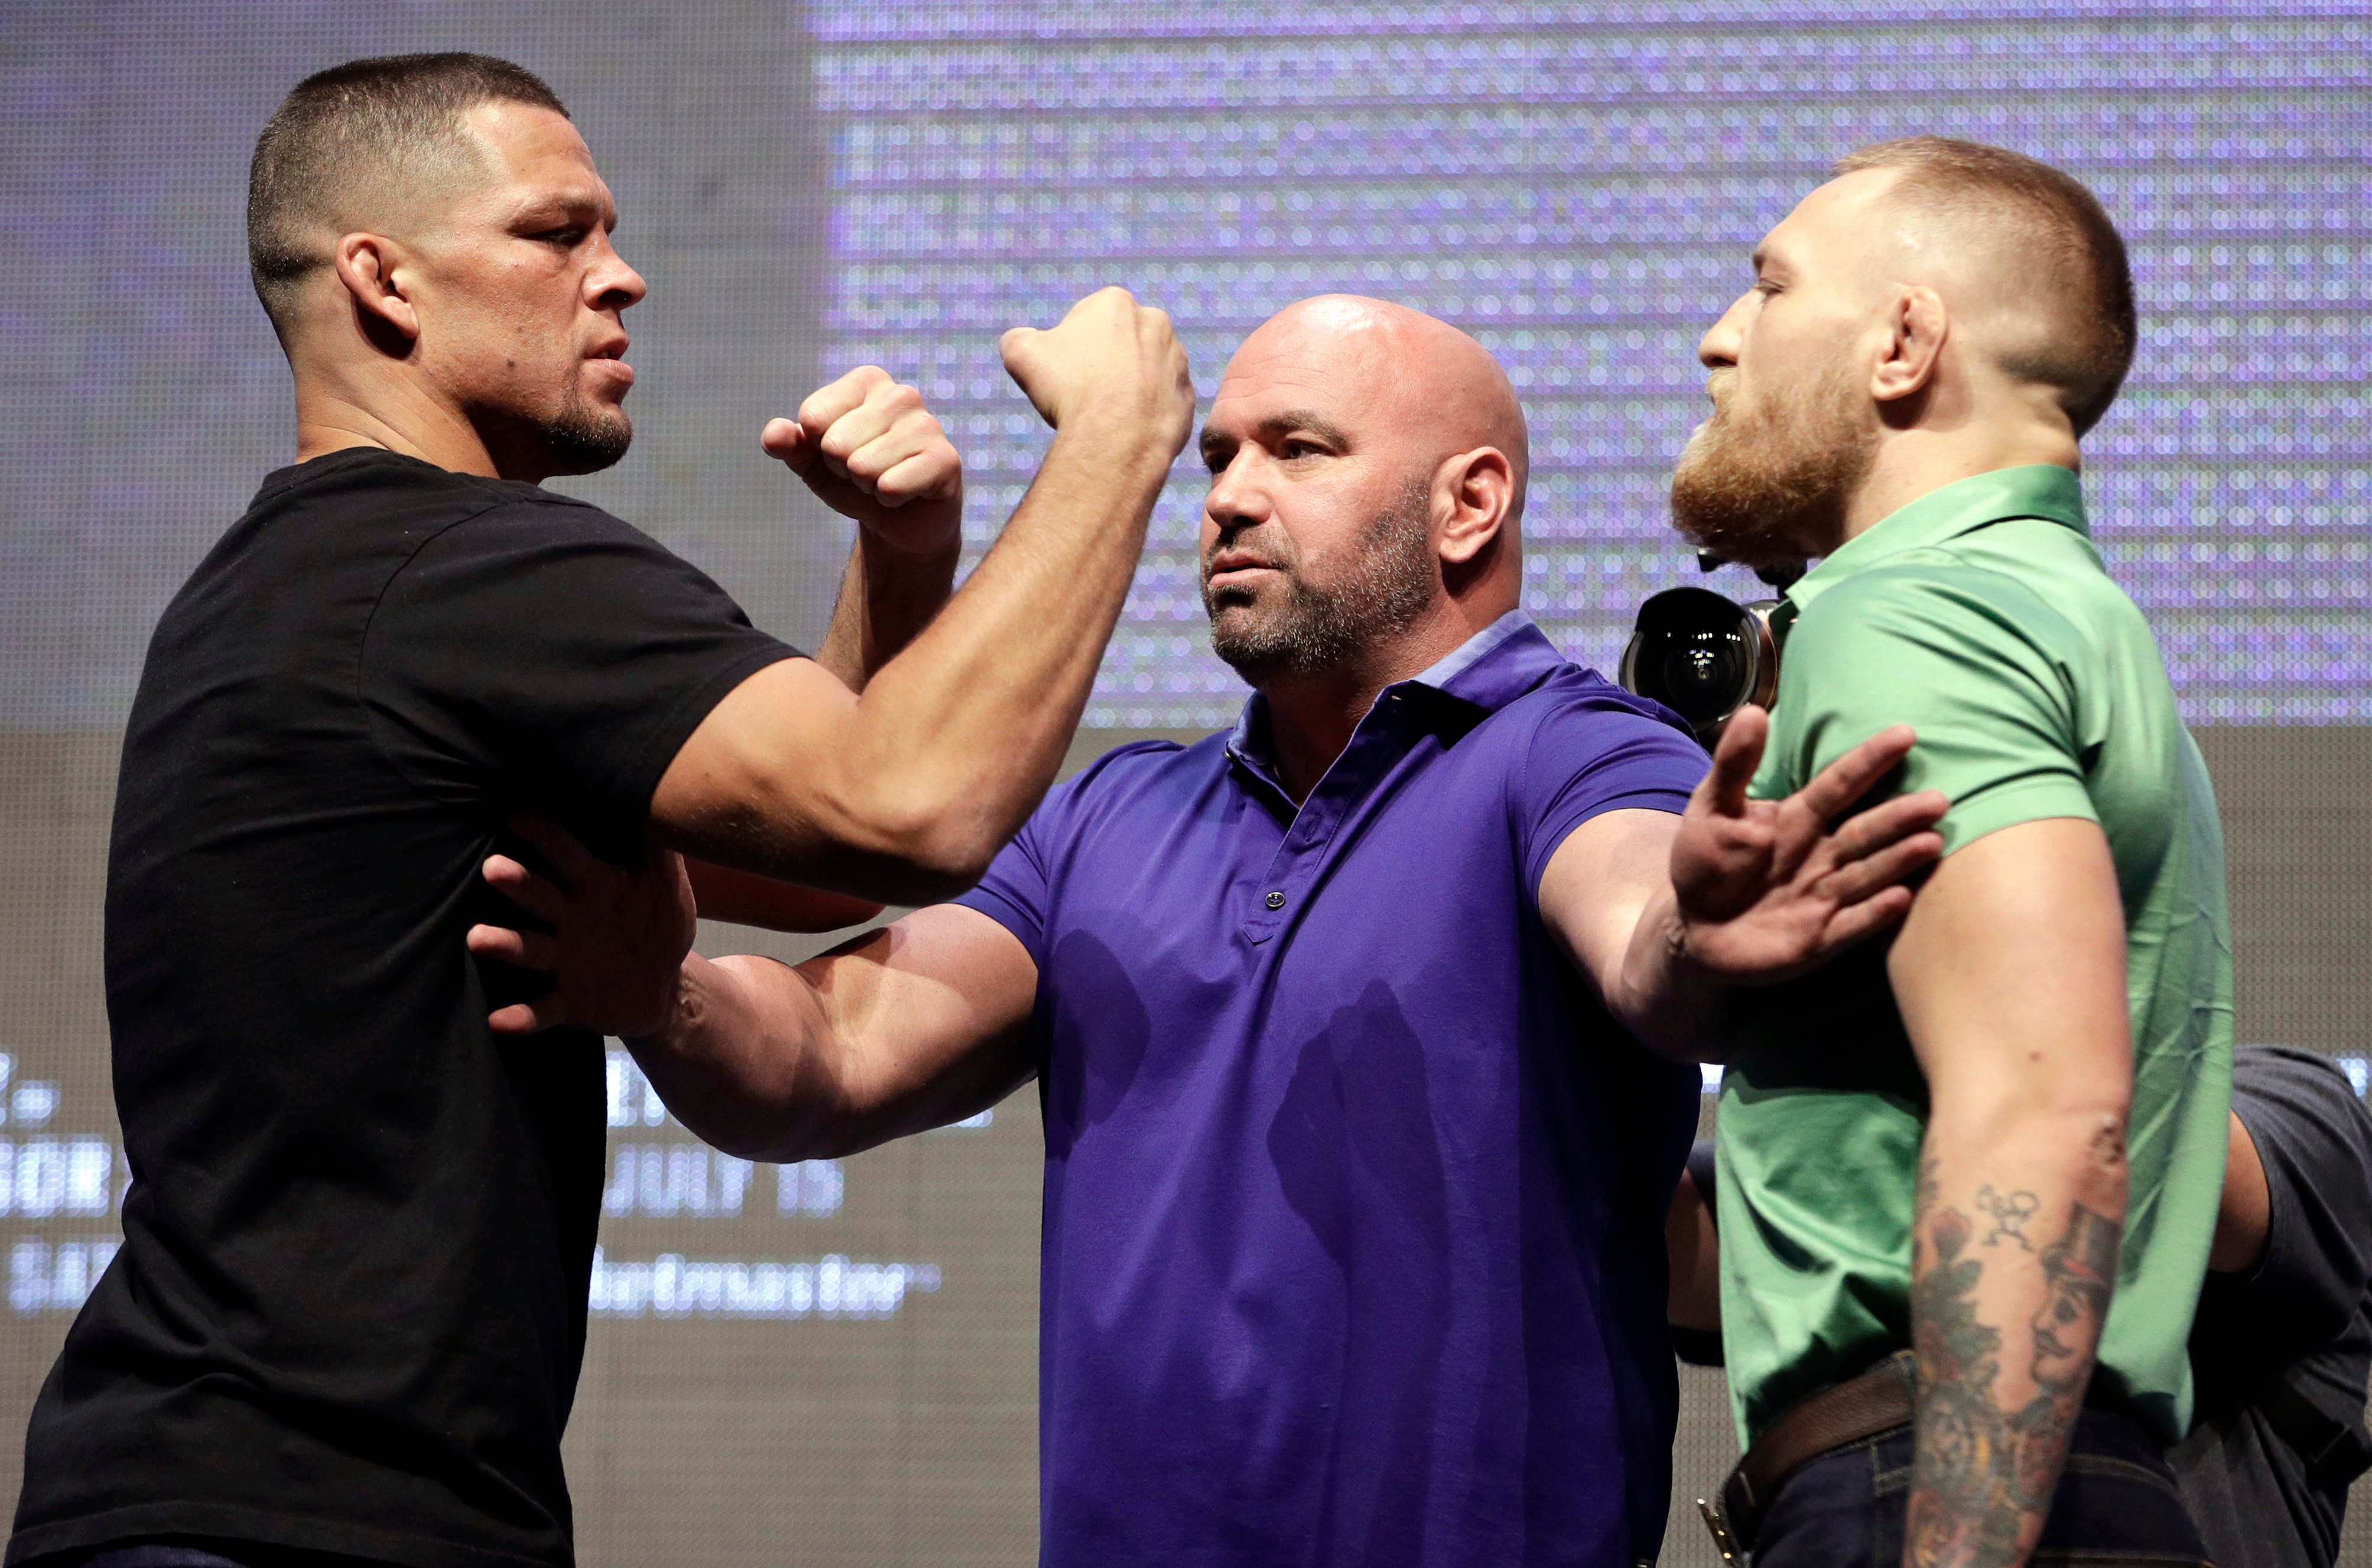 Nate Diaz (left) and Conor McGregor square off before their fight at UFC 196 in 2016. Photo: AP Photo/John Locher, File